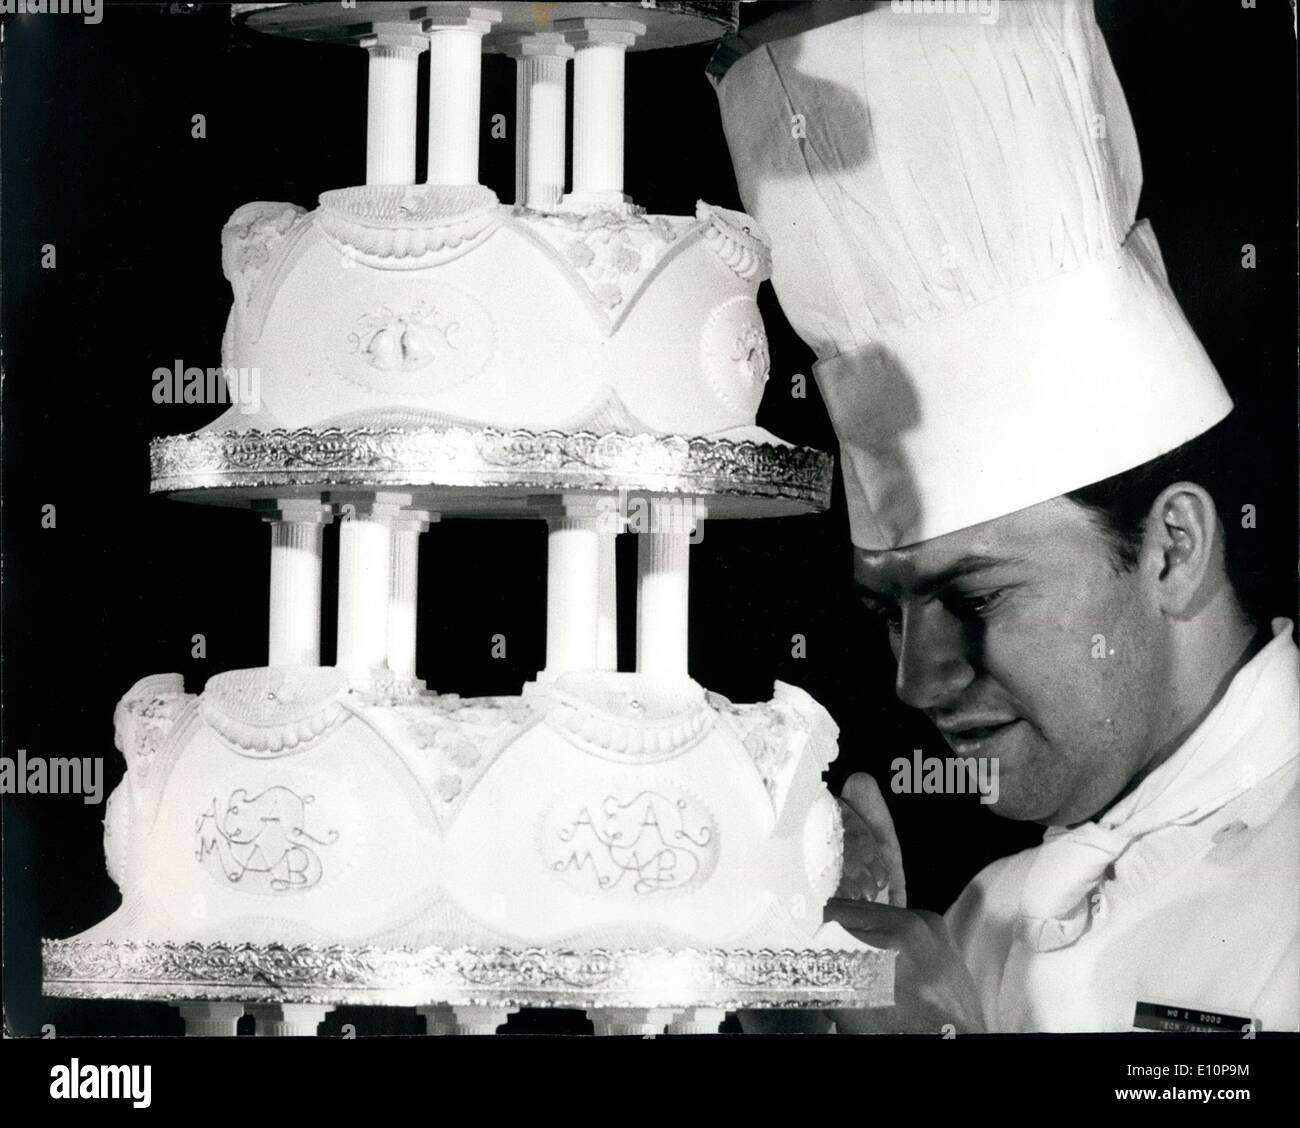 Nov. 11, 1973 - THE ARMY CATERING CORPS AT ALDERSHOT MAKE PRINCESS ANNE'S WEDDING CAKE. The Army Catering Corps at Aldershot have made the official cake for the wedding of PRINCESS ANNE to CAPTAIN MARK PHILLIPS next Wednesday. The honour of designing and making the cake was vested in warrant officer DAVID DODD, who is instructor at the Army School of DODD, who is instructor at the Army School of Catering st Aldershot. It is a 5-tier cake, standing 5-foot, 8 inches high, has a 22-inch diameter base and weighs approximately 145 lbs Stock Photo